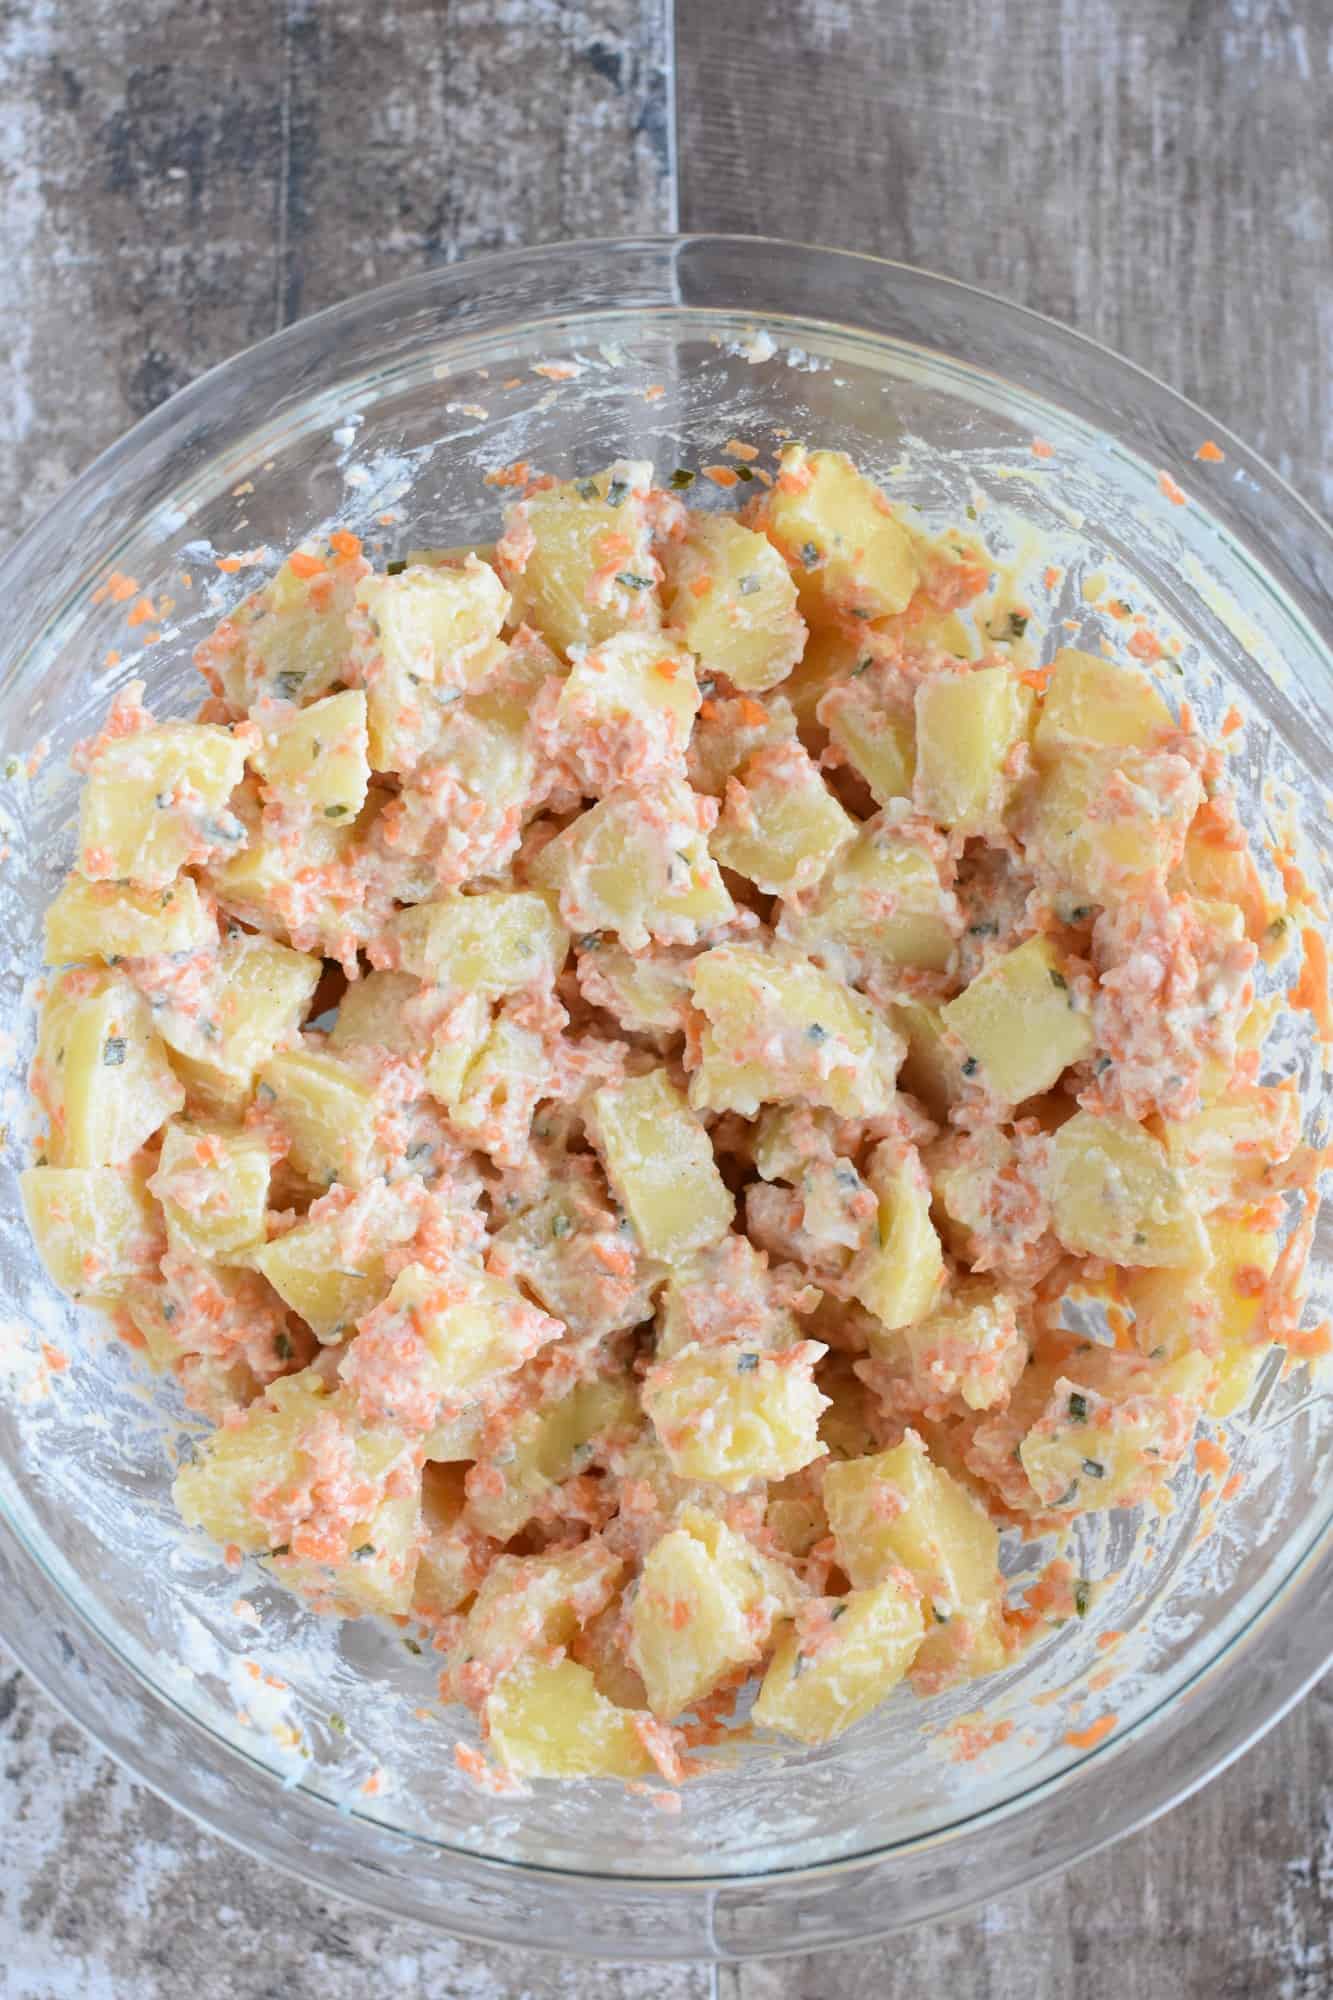 ingredients stirred into potato salad in the mixing bowl